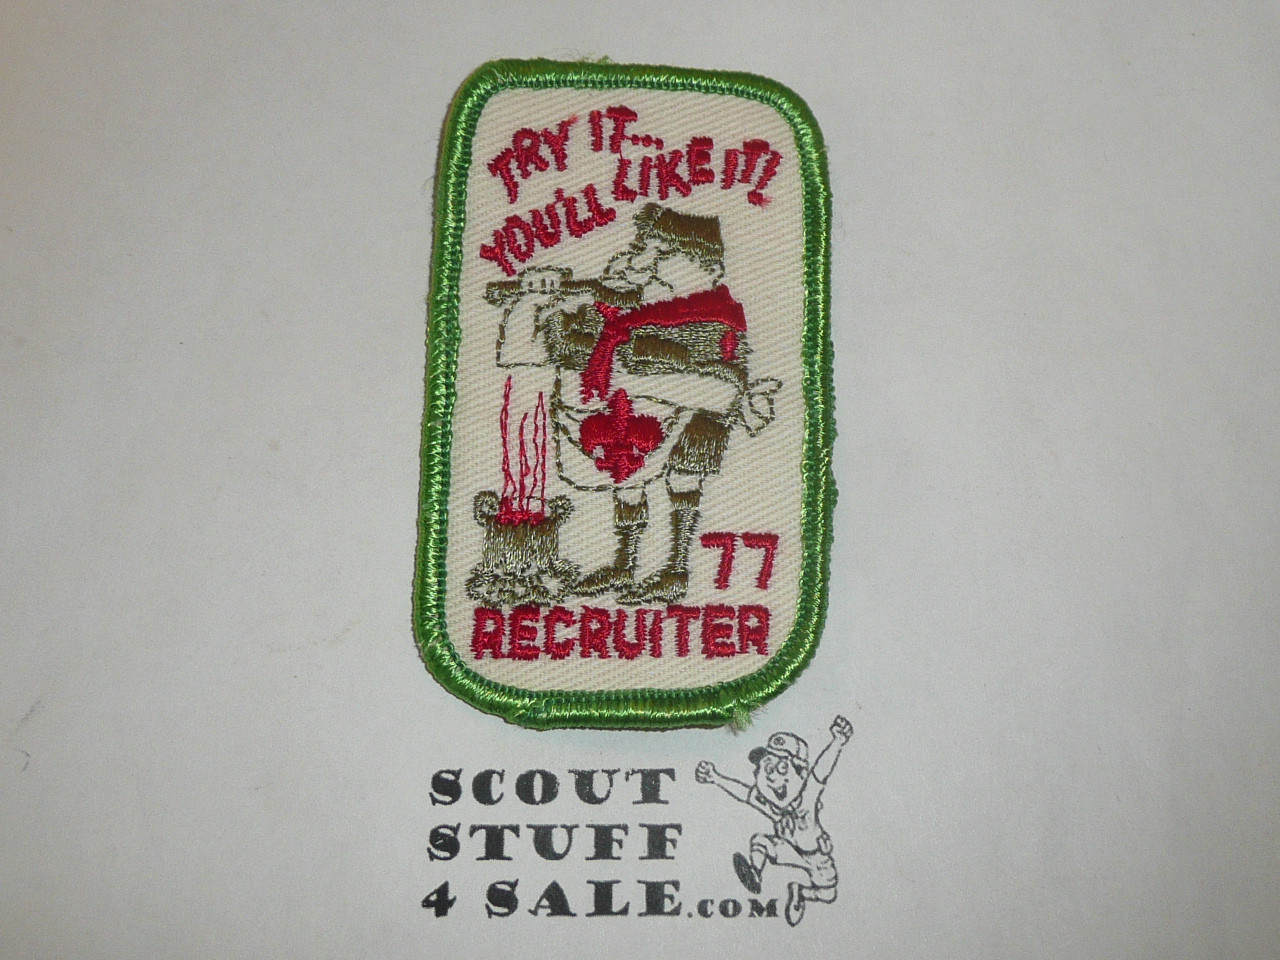 Recruiter Patch, 1977 Try it You'll Like It